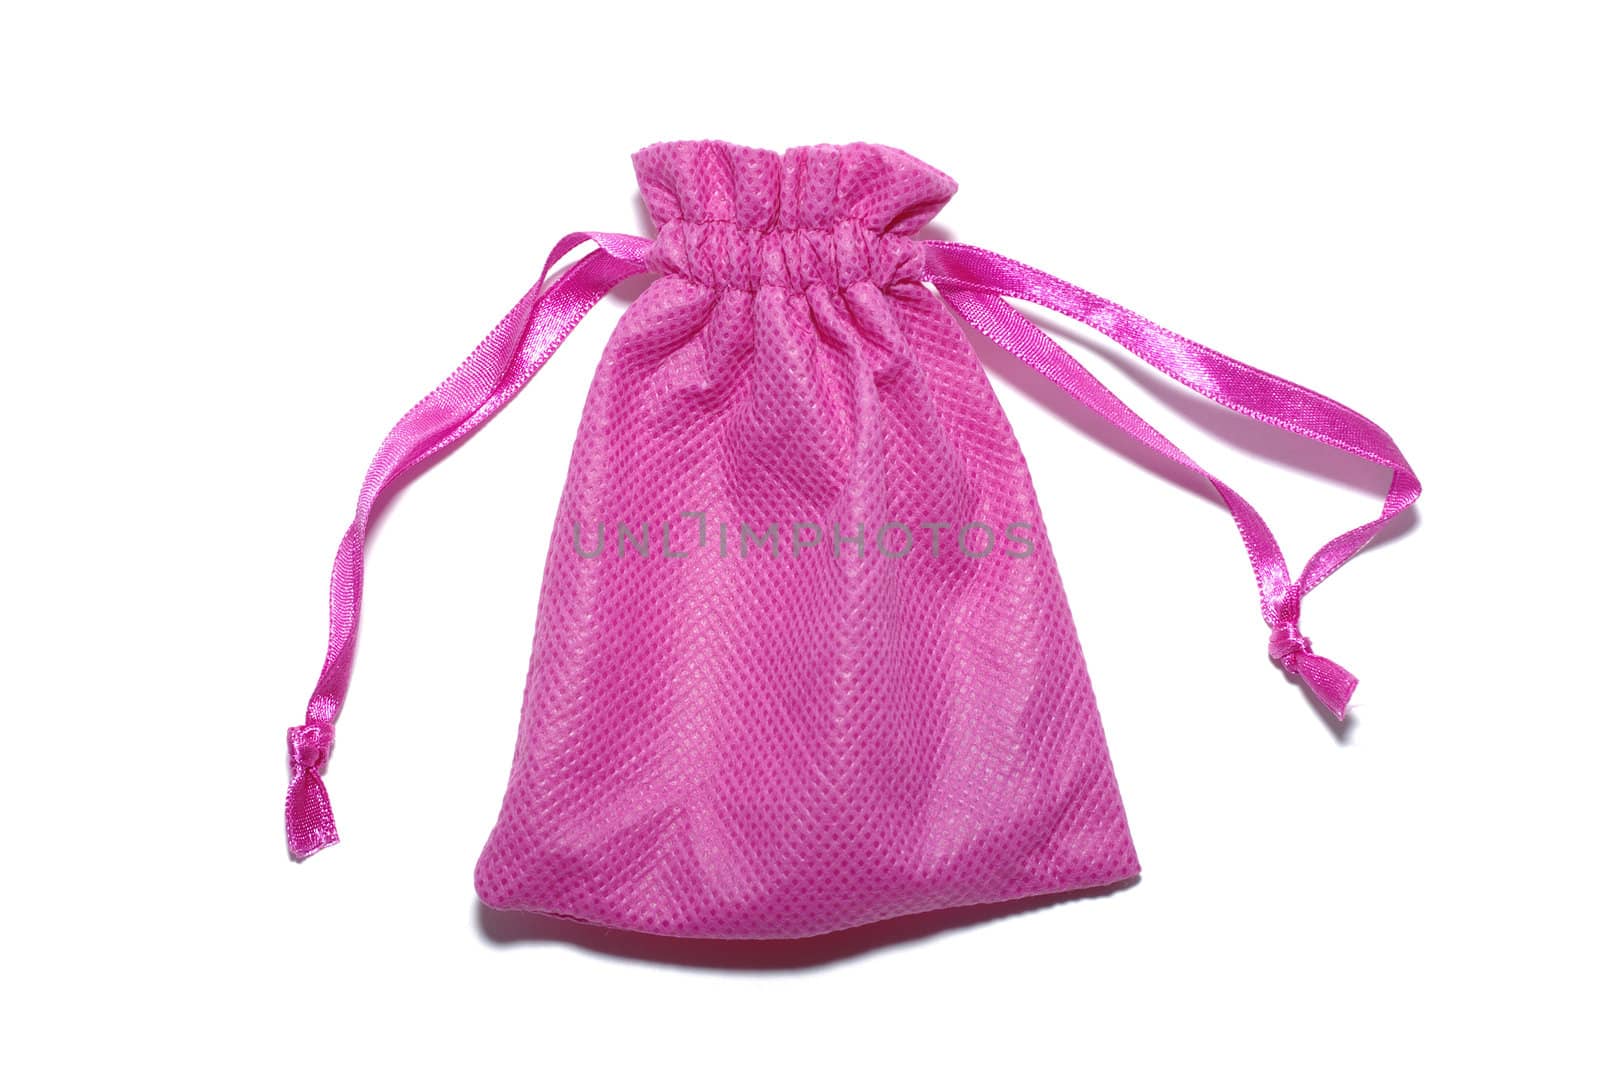 Pink sack for gifts isolated on white background.